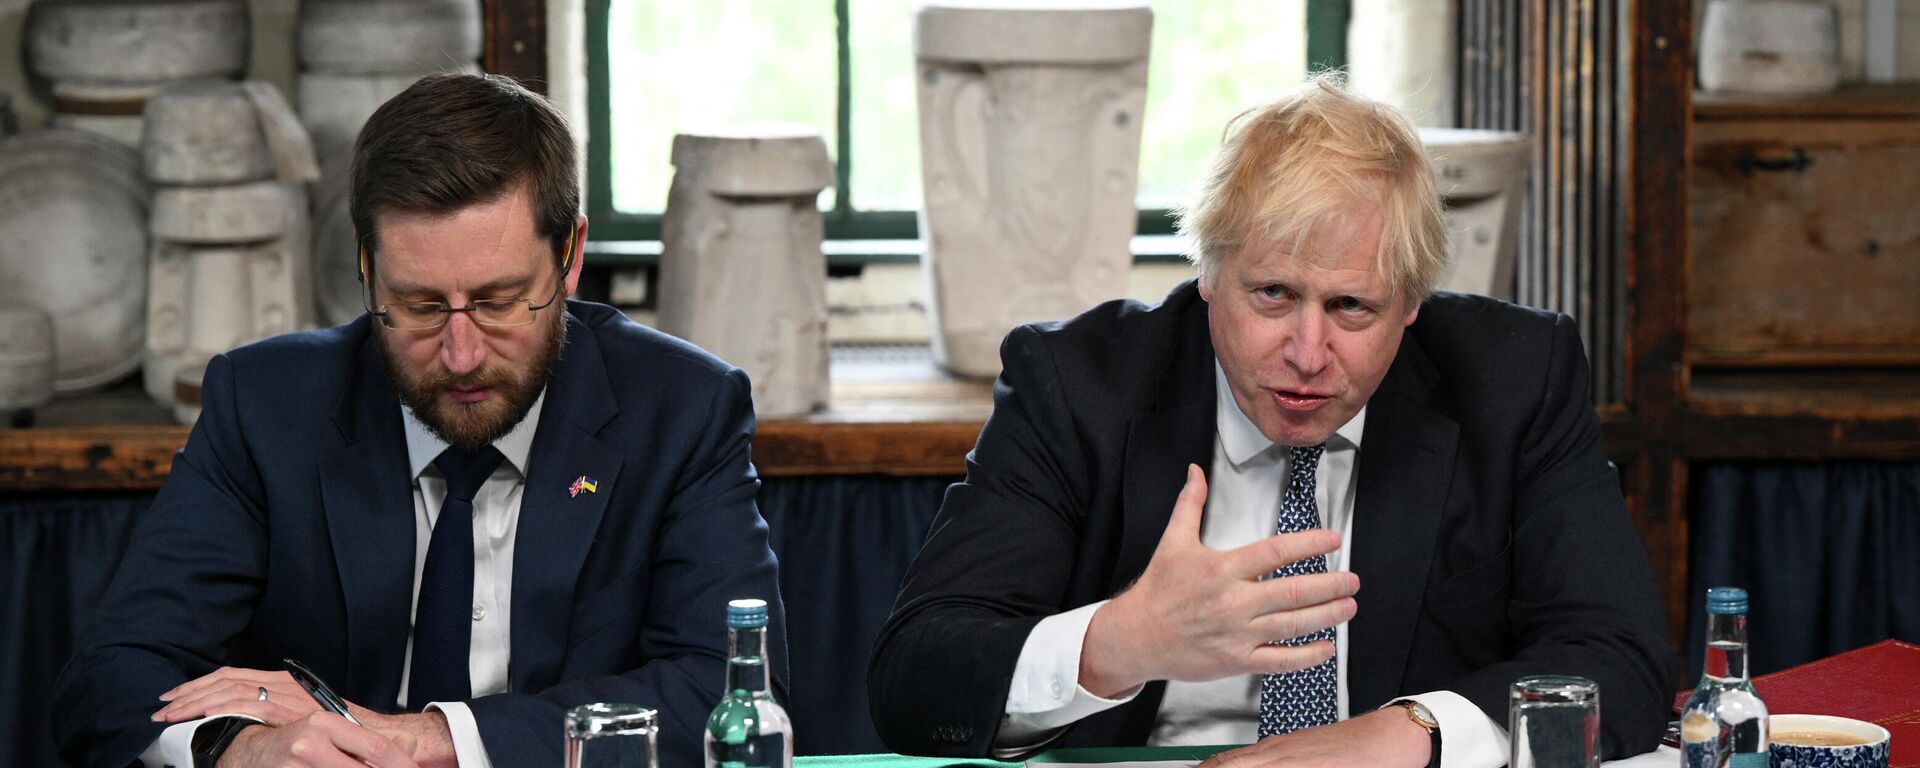 Britain's Prime Minister Boris Johnson (R), flanked by Britain's Cabinet Secretary and Head of the Civil Service Simon Case, chairs a Cabinet meeting at a pottery in Stoke-on-Trent, central England, on May 12, 2022 - Sputnik International, 1920, 22.05.2022